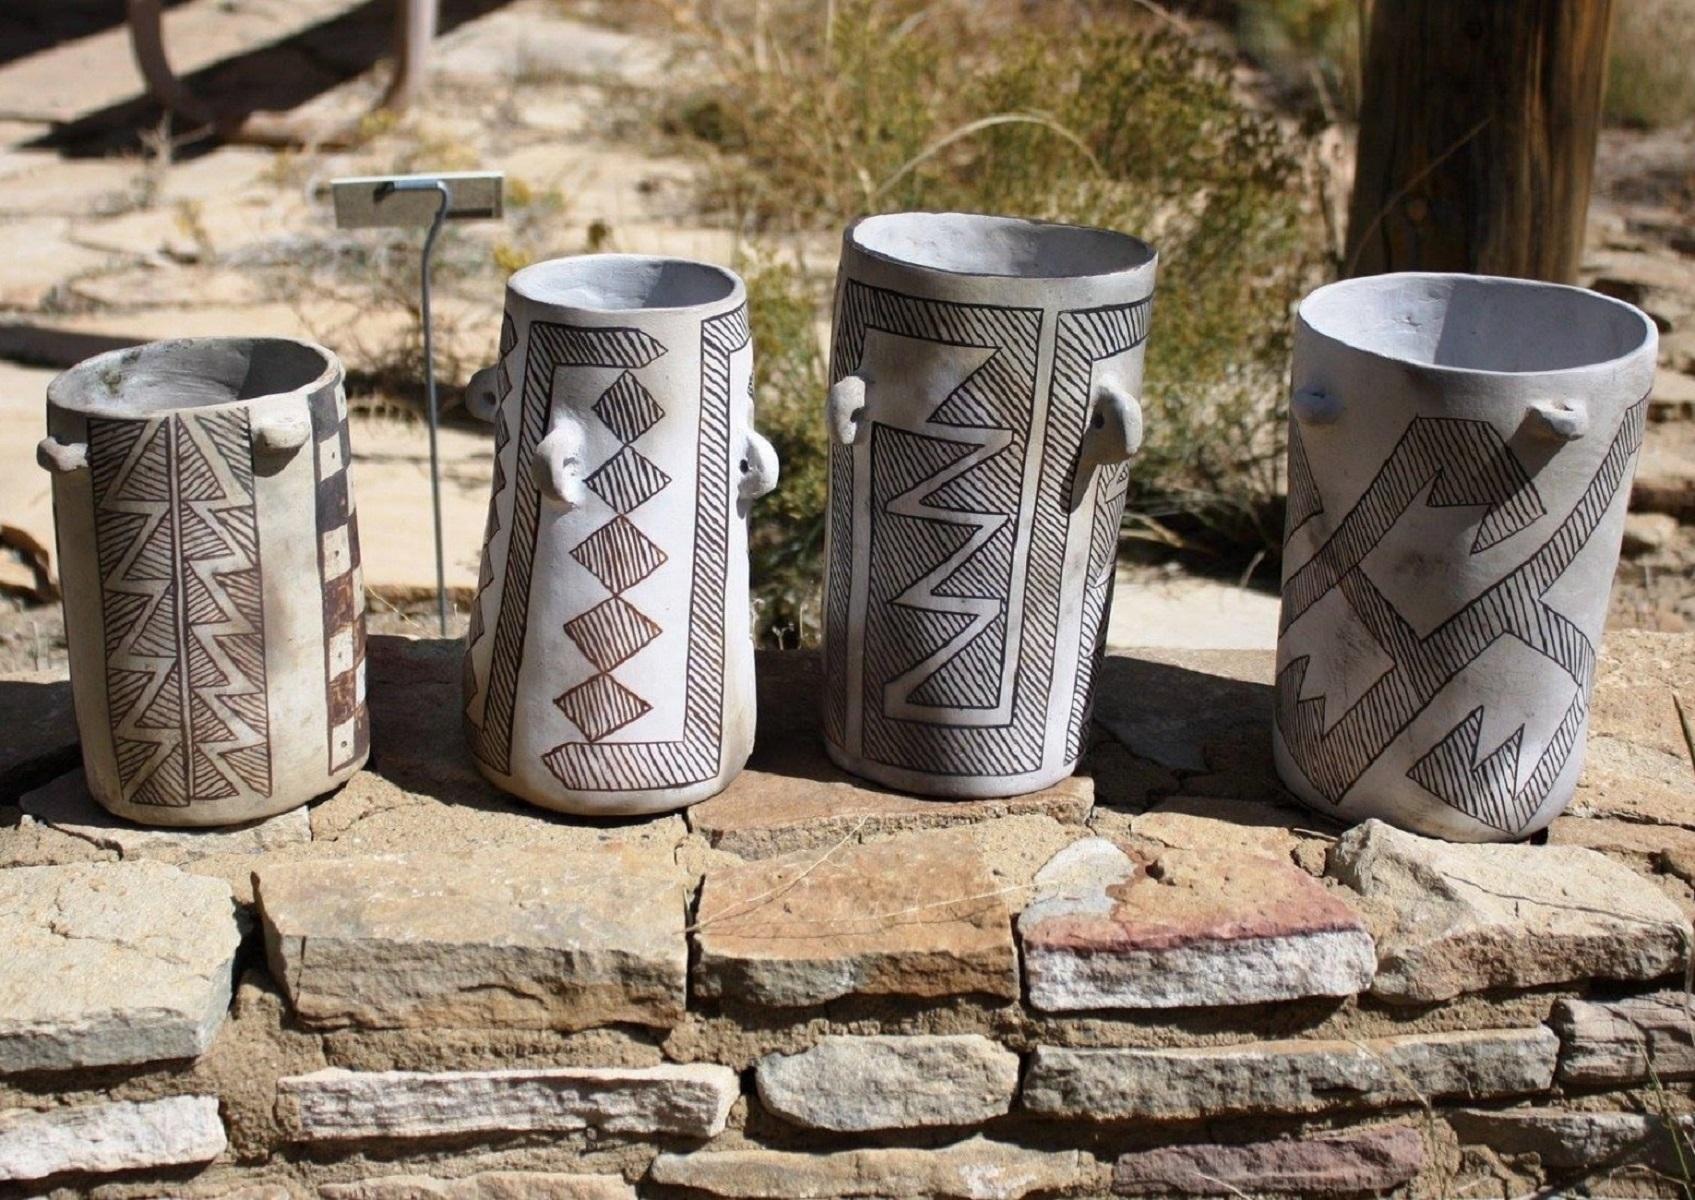 A series of 4 Chacoan jars replicated in the same black on white style that was excavated long ago.